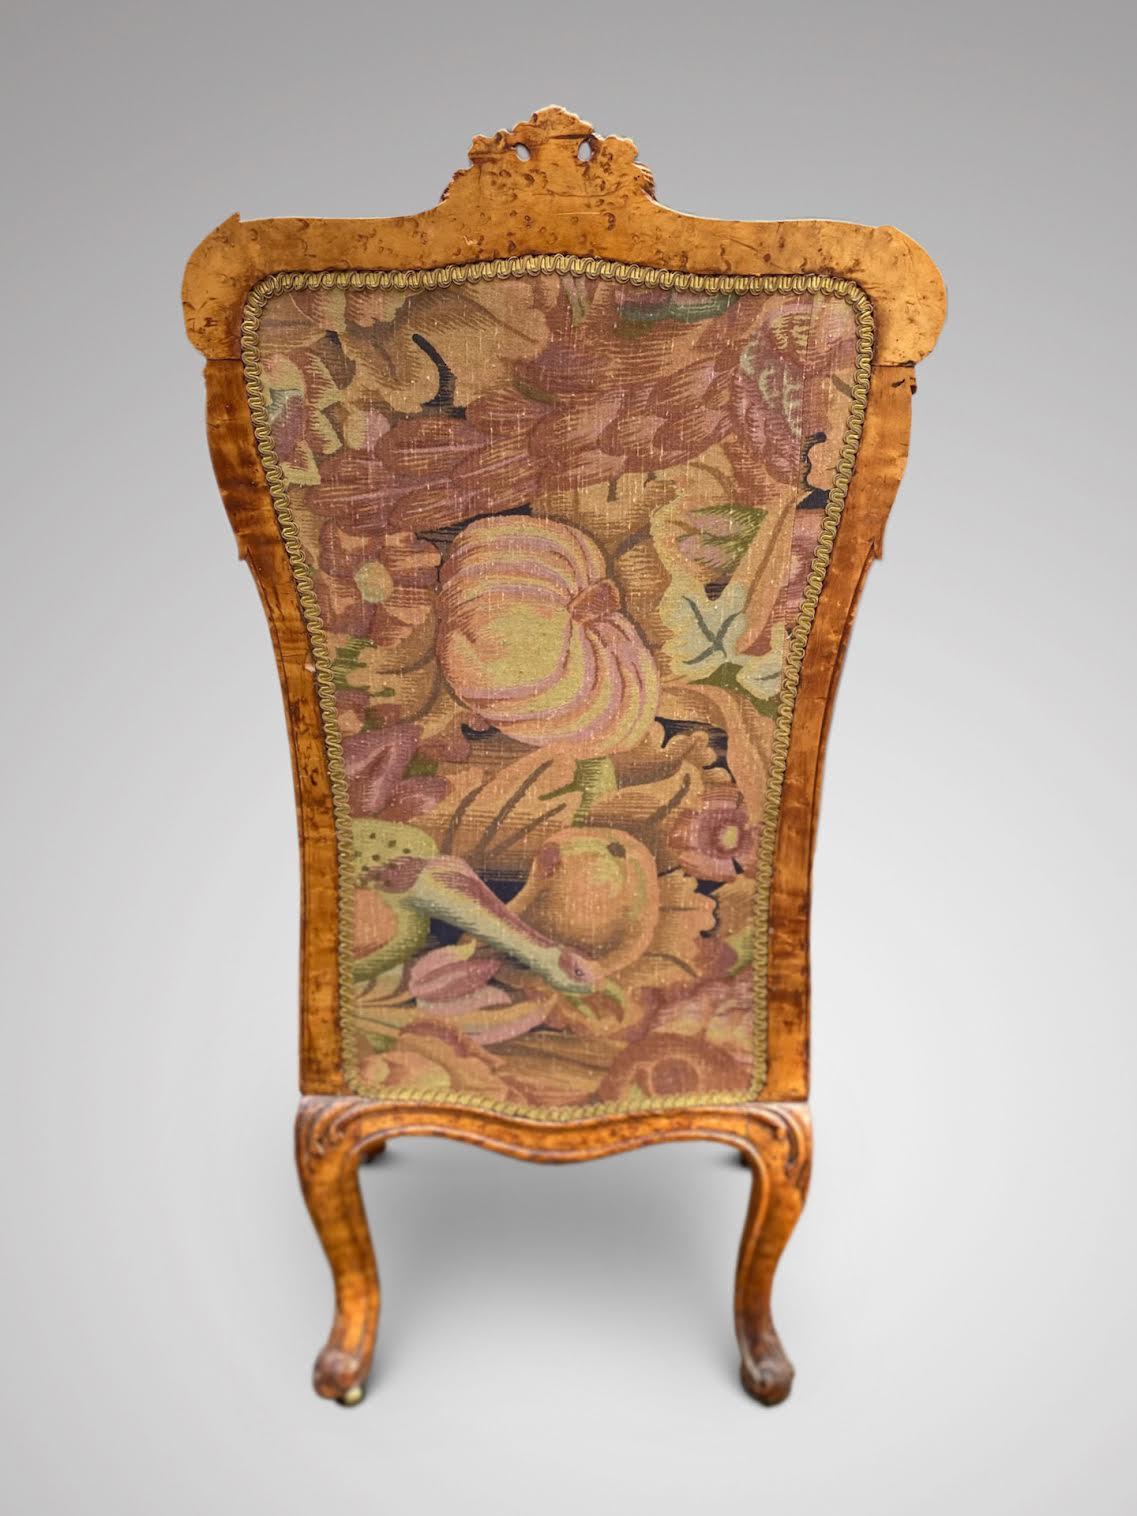 Stunning Mid 19th Century Burr Elm Nursing Chair In Good Condition For Sale In Petworth,West Sussex, GB